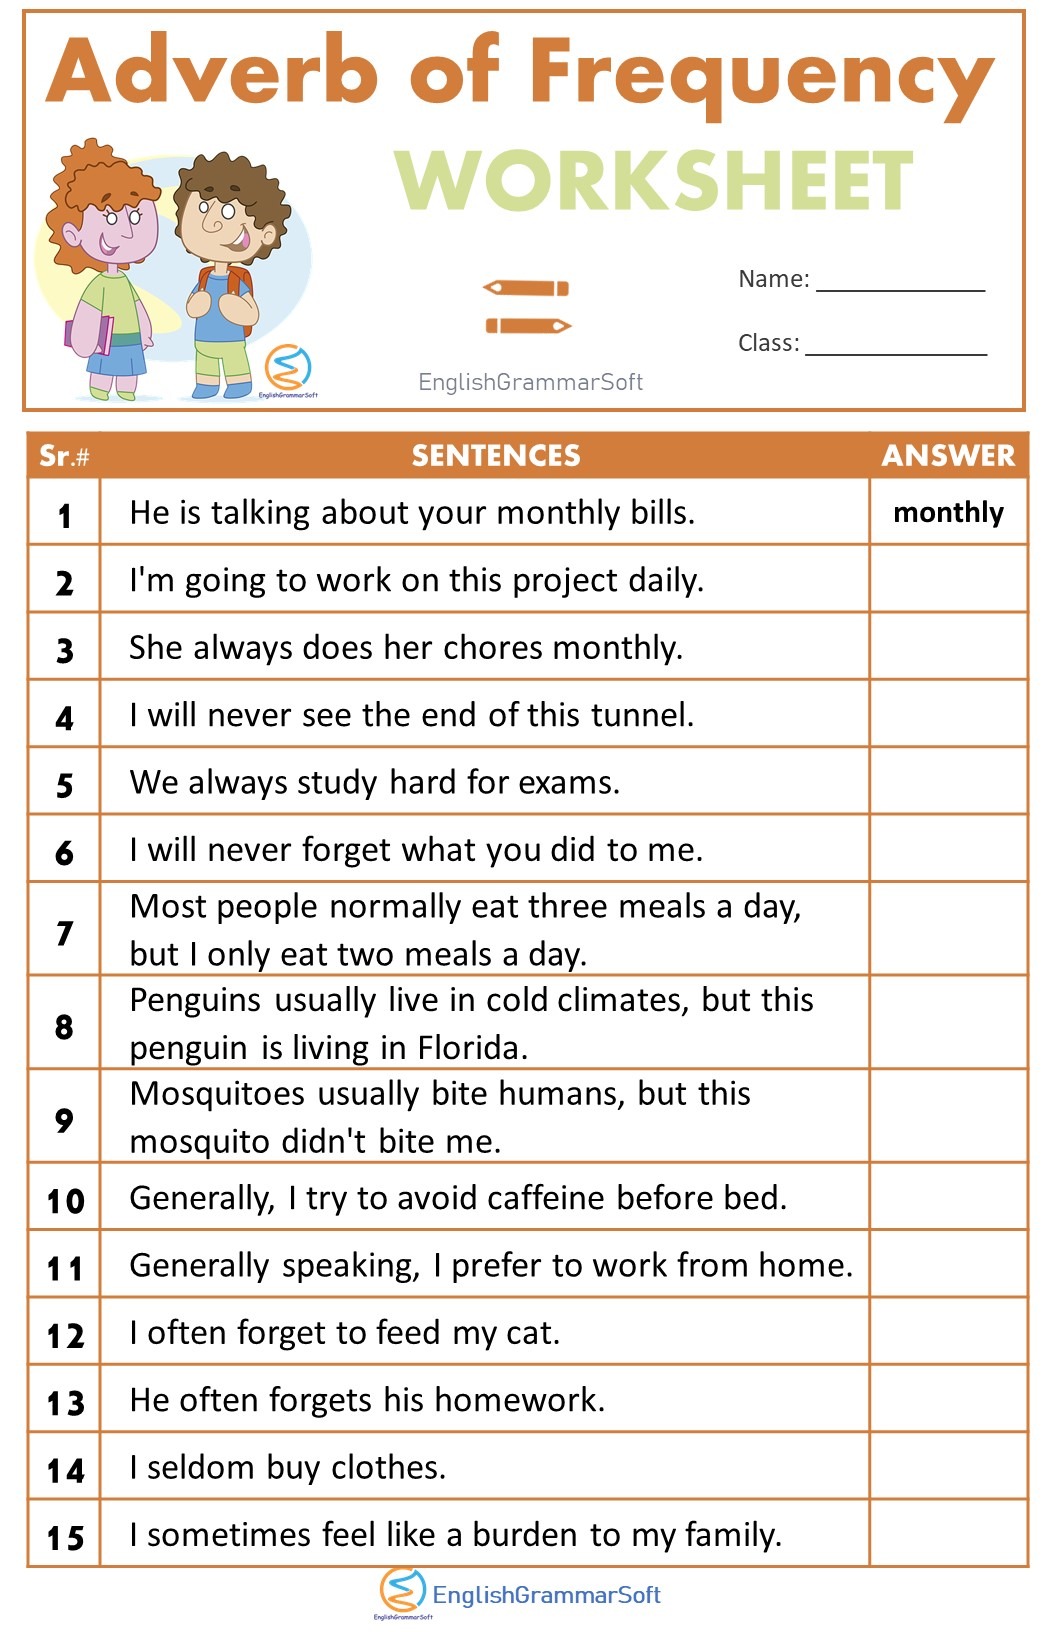 Adverb of Frequency Worksheet with Answers